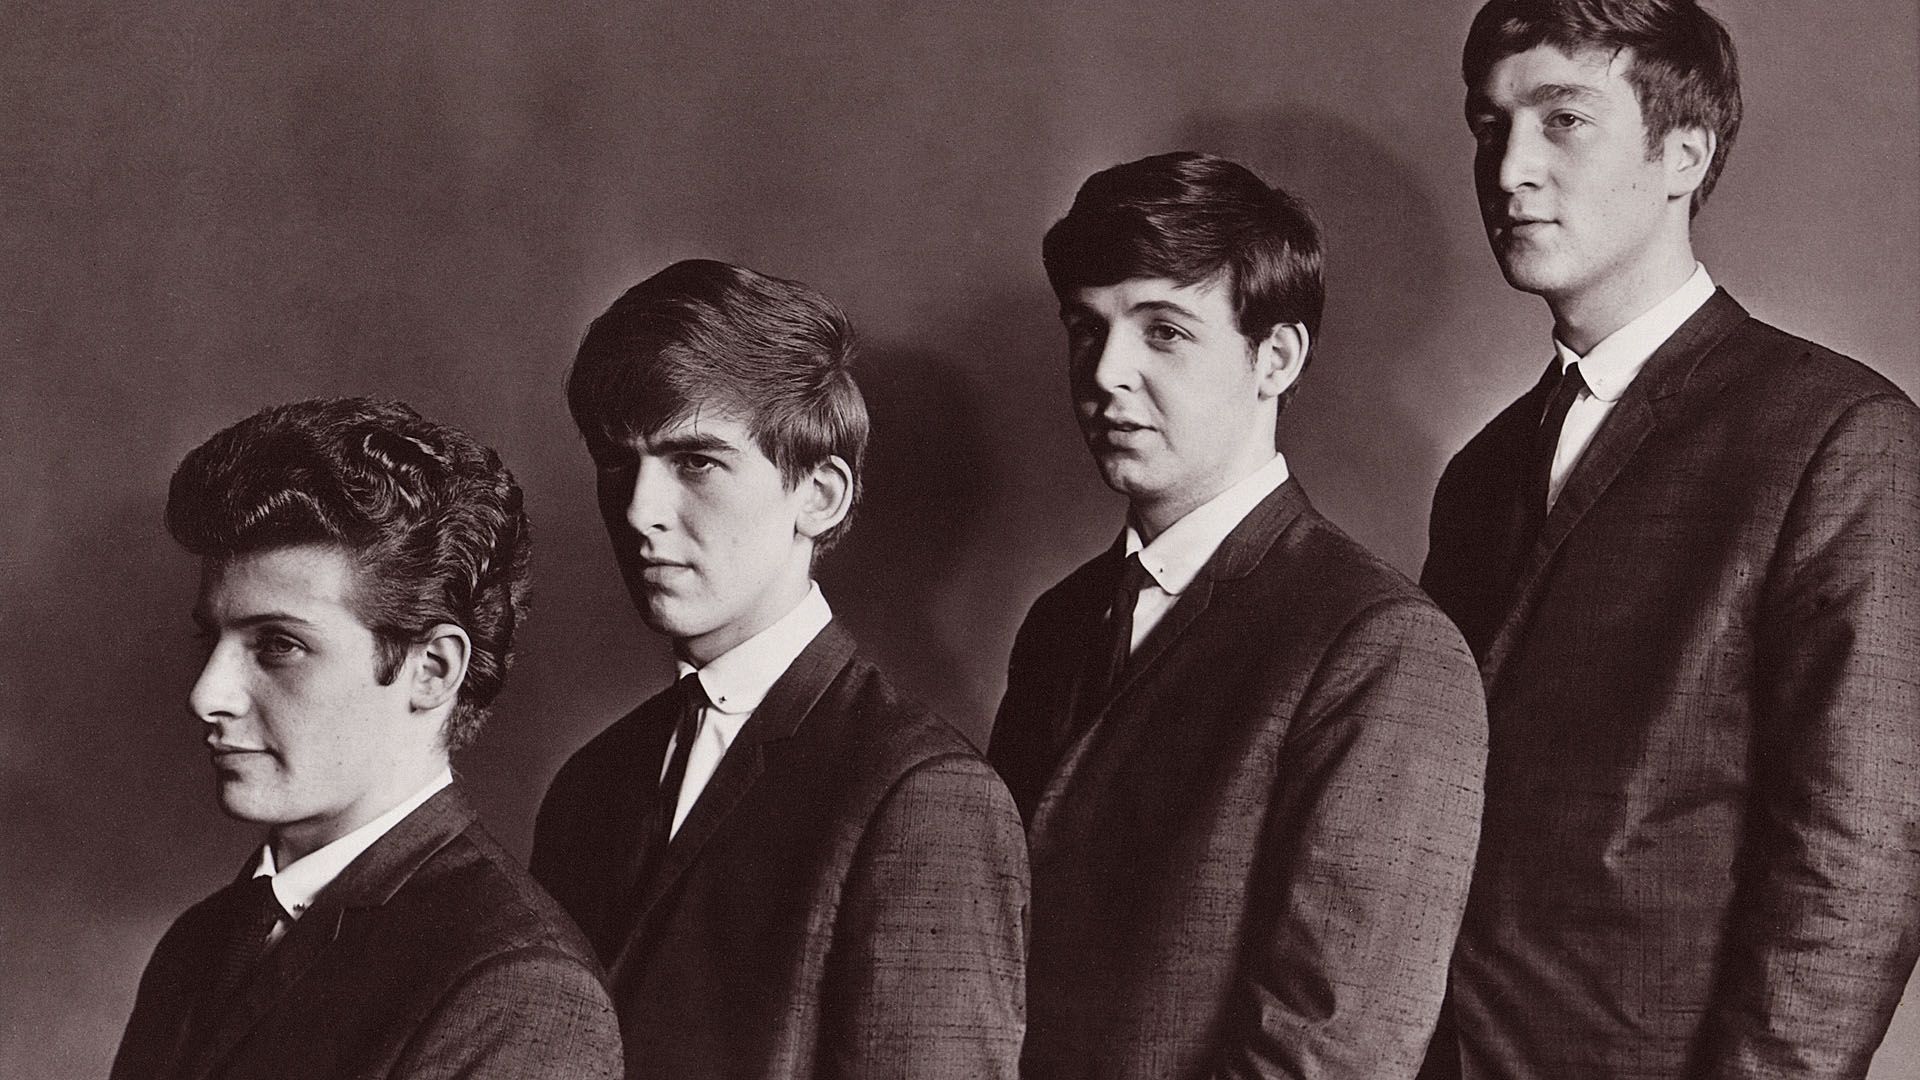 Download Wallpaper 1920x1080 The beatles, Band, Faces, Suits, Ties ...